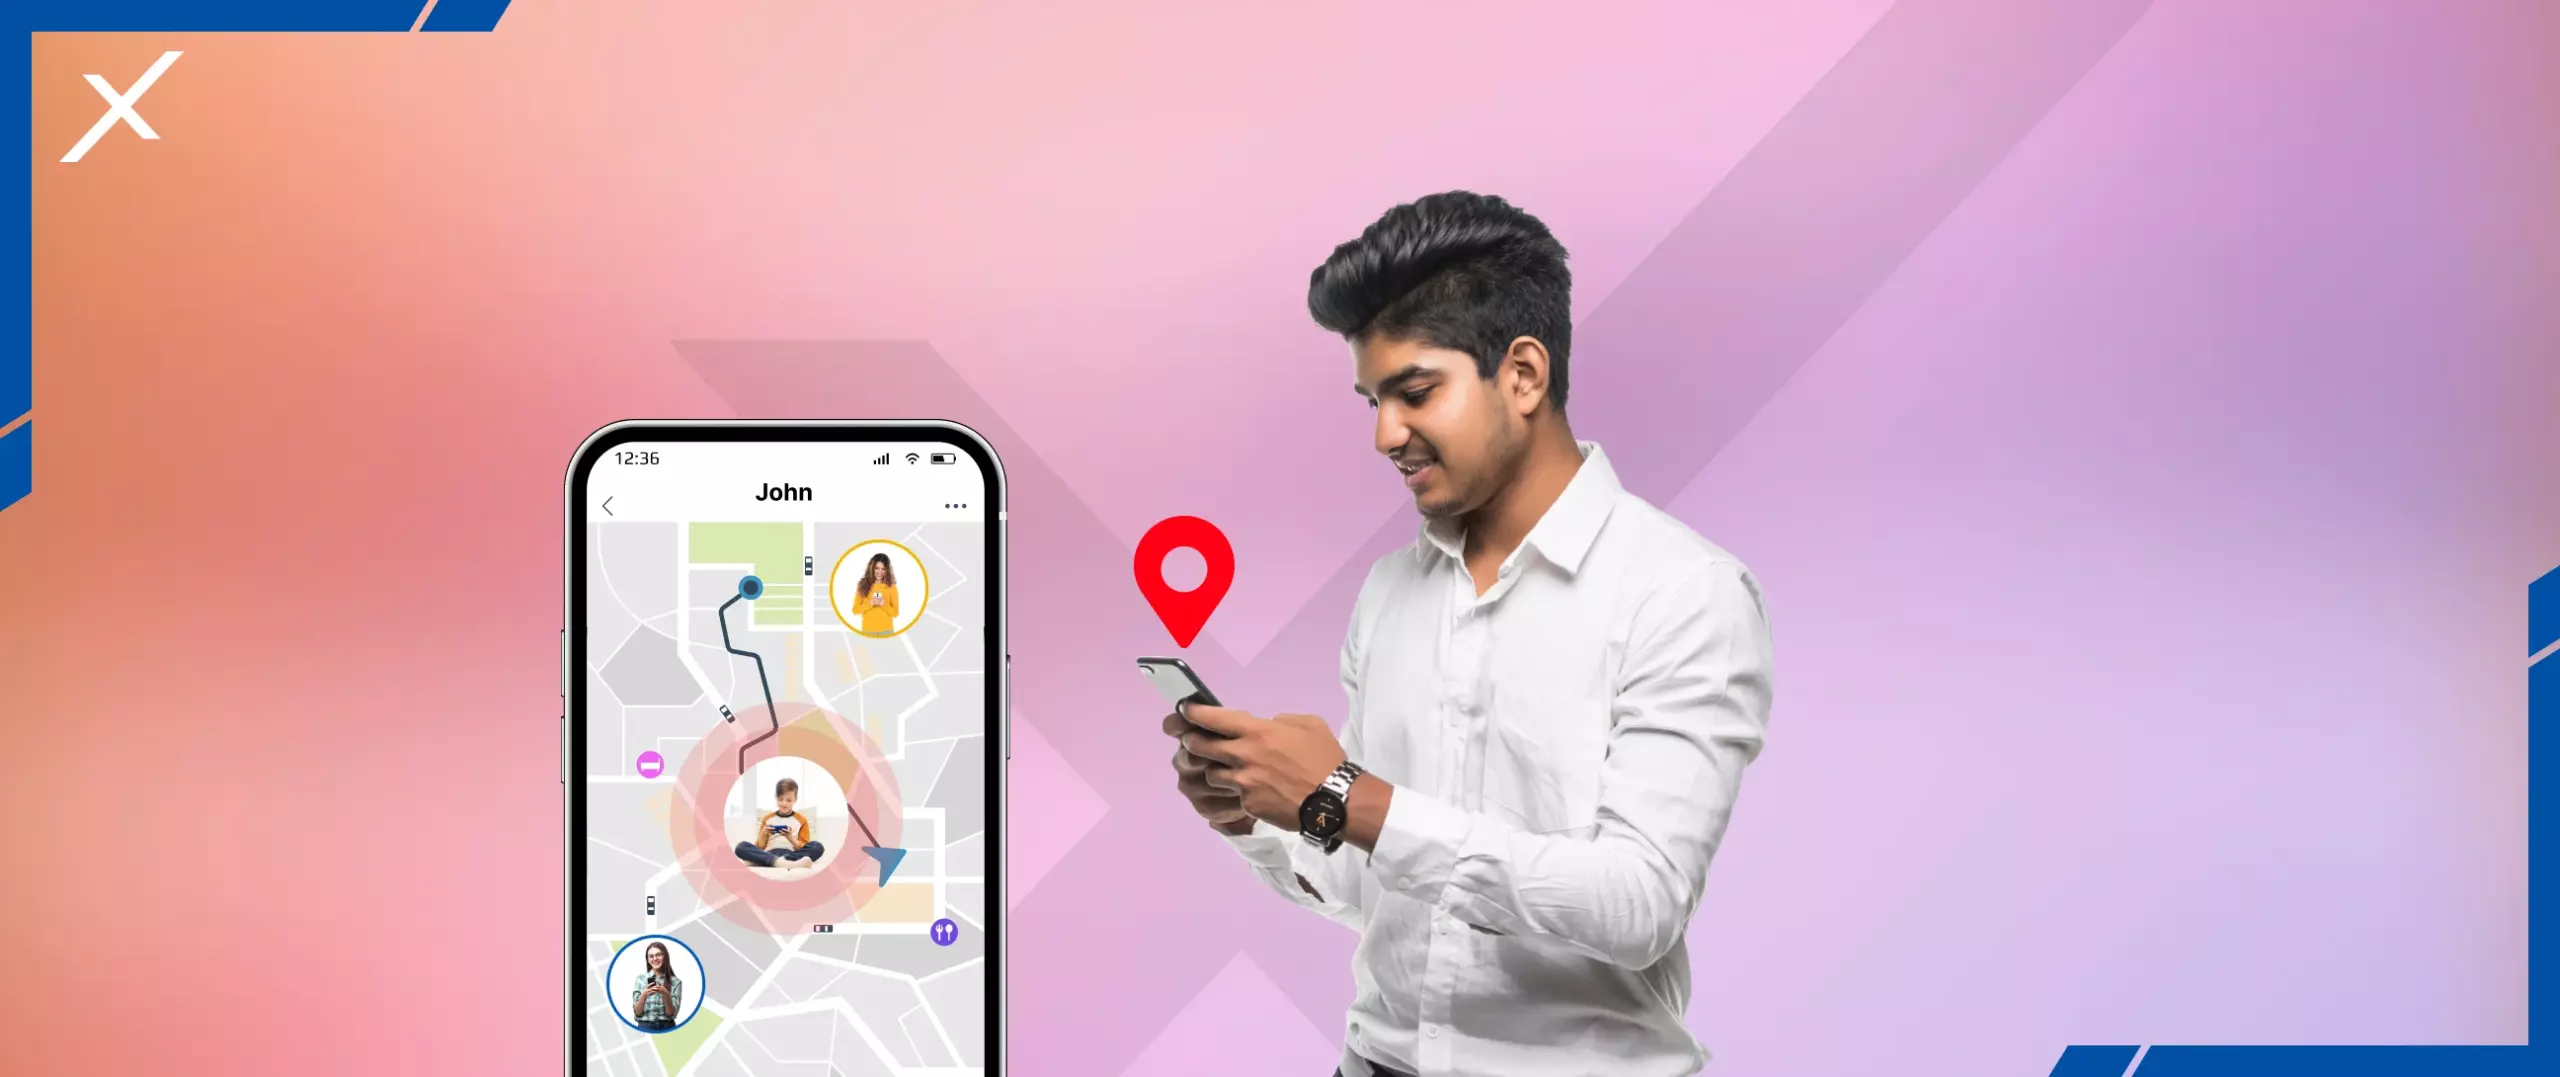 How To Know Someone’s Exact Location With a Phone Tracking App